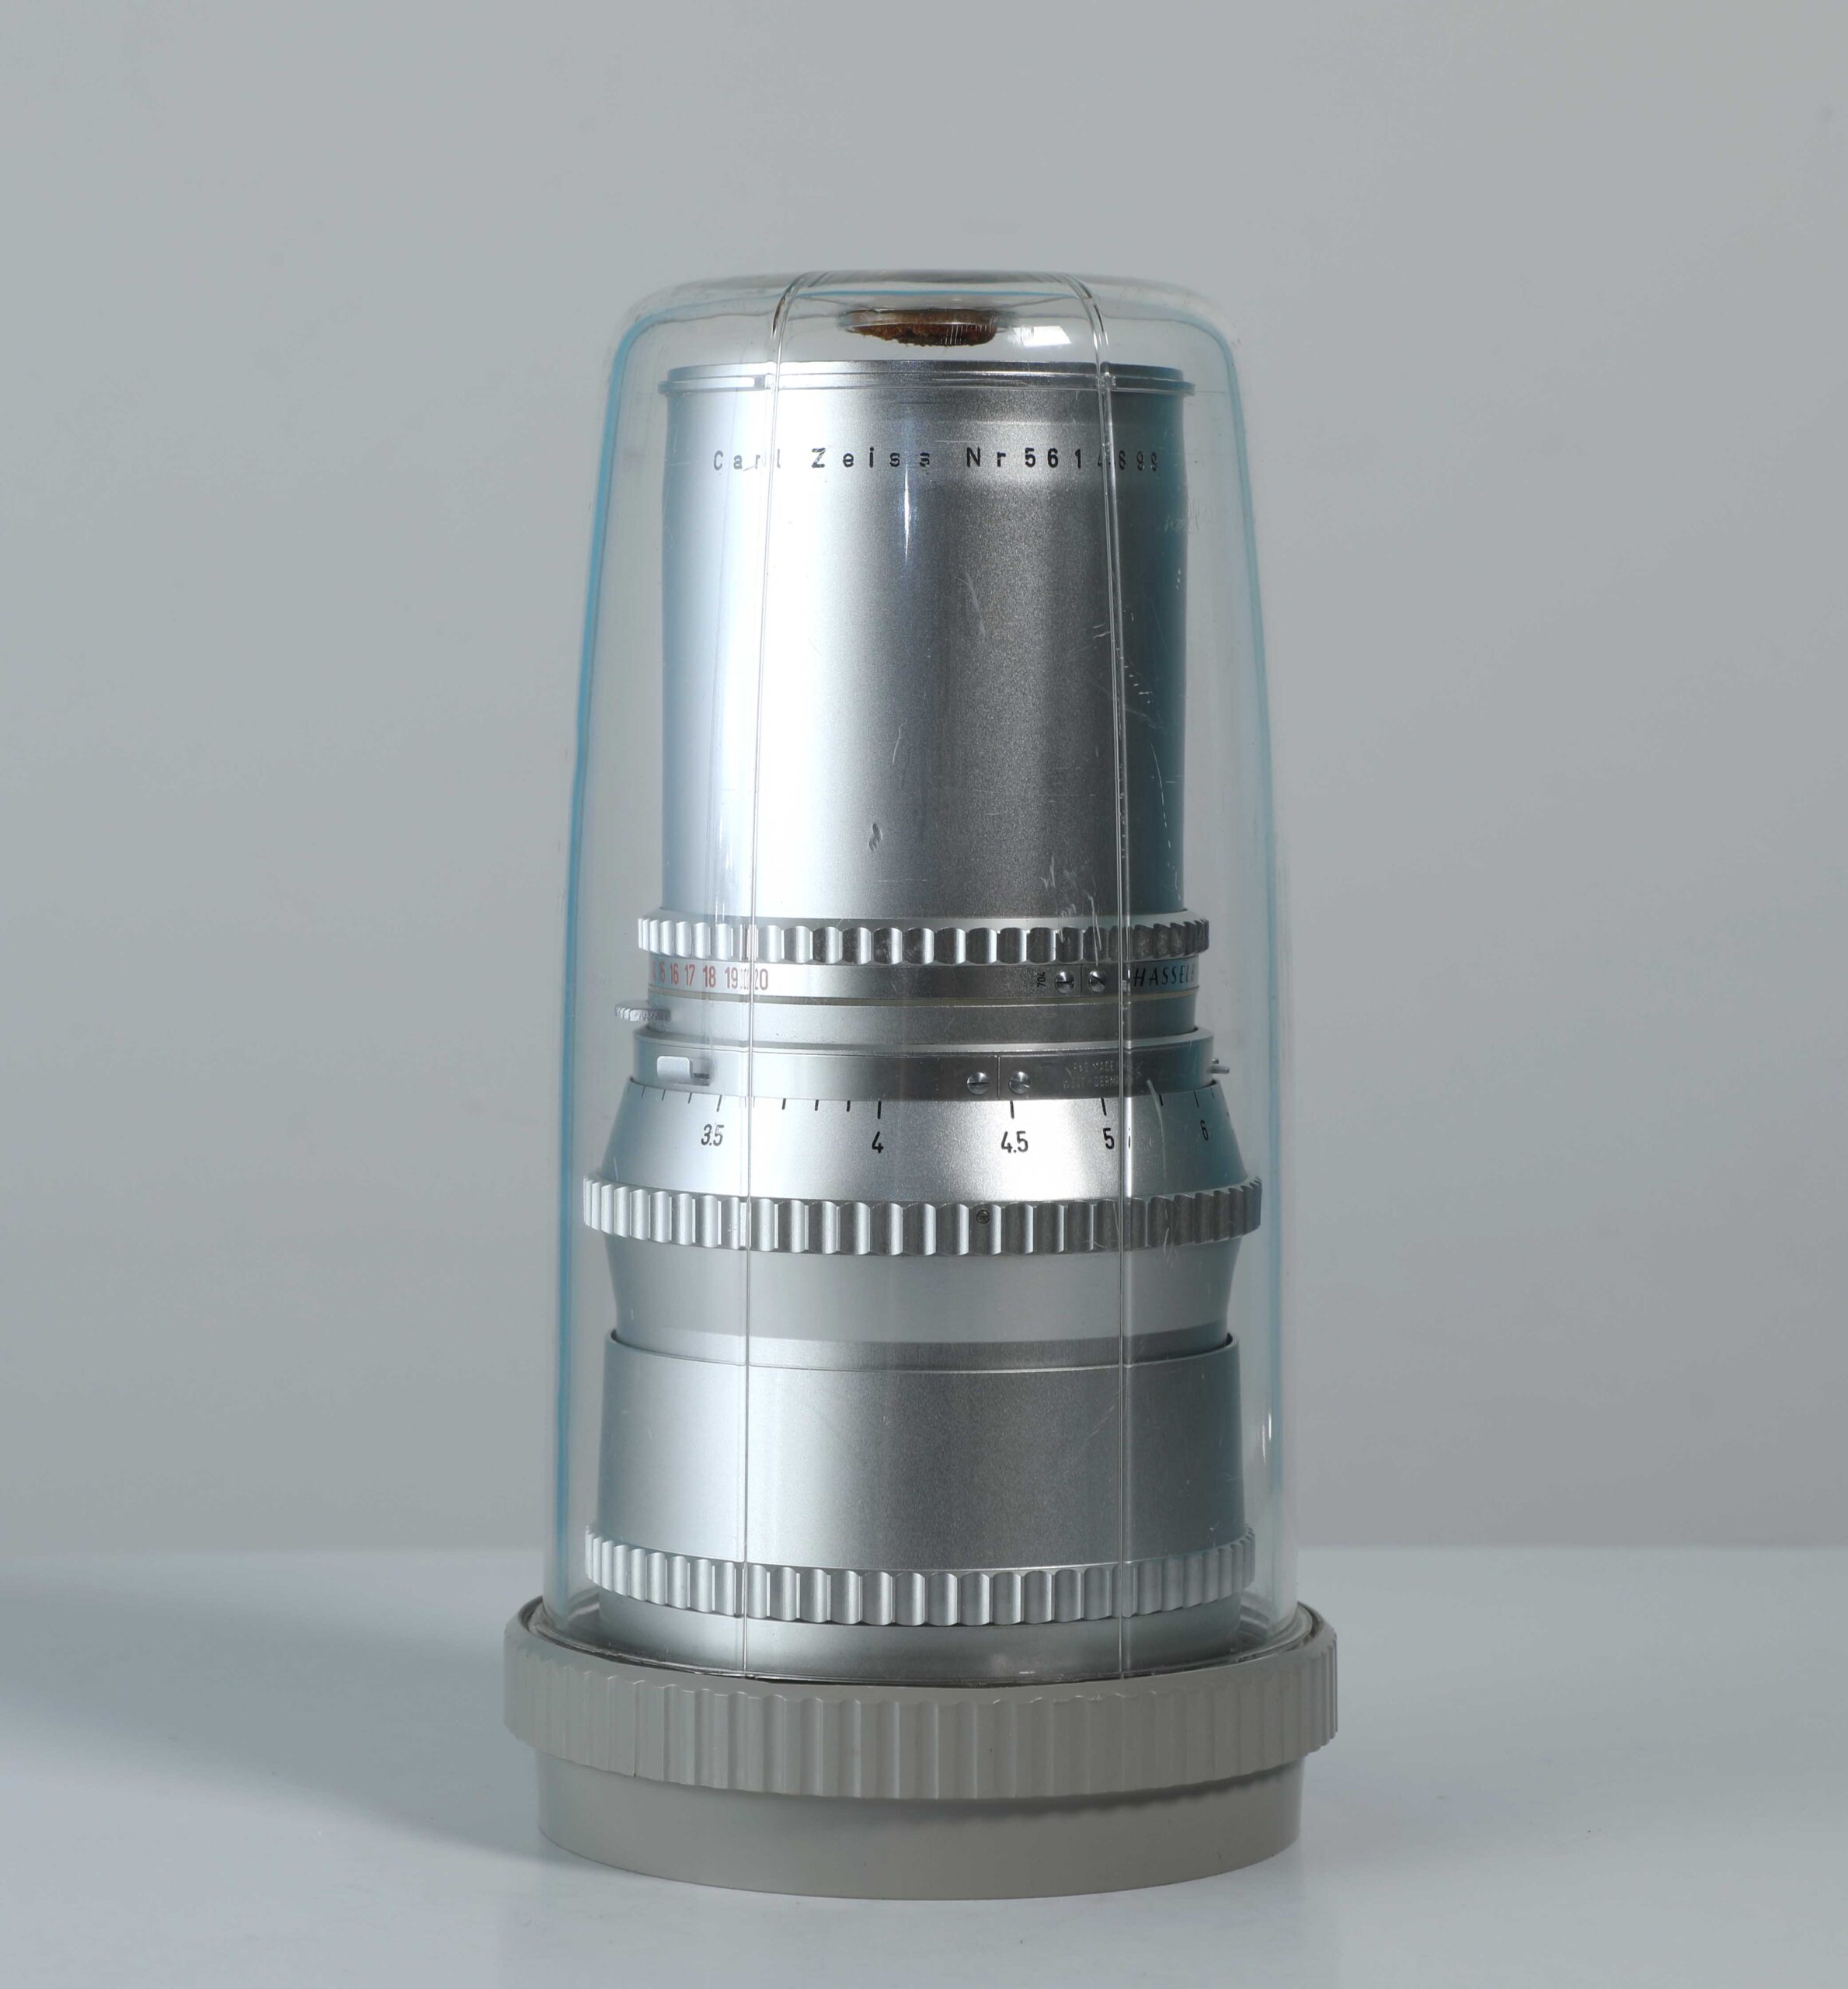 HASSELBLAD Carl Zeiss Sonnar 250mm F5.6 T*